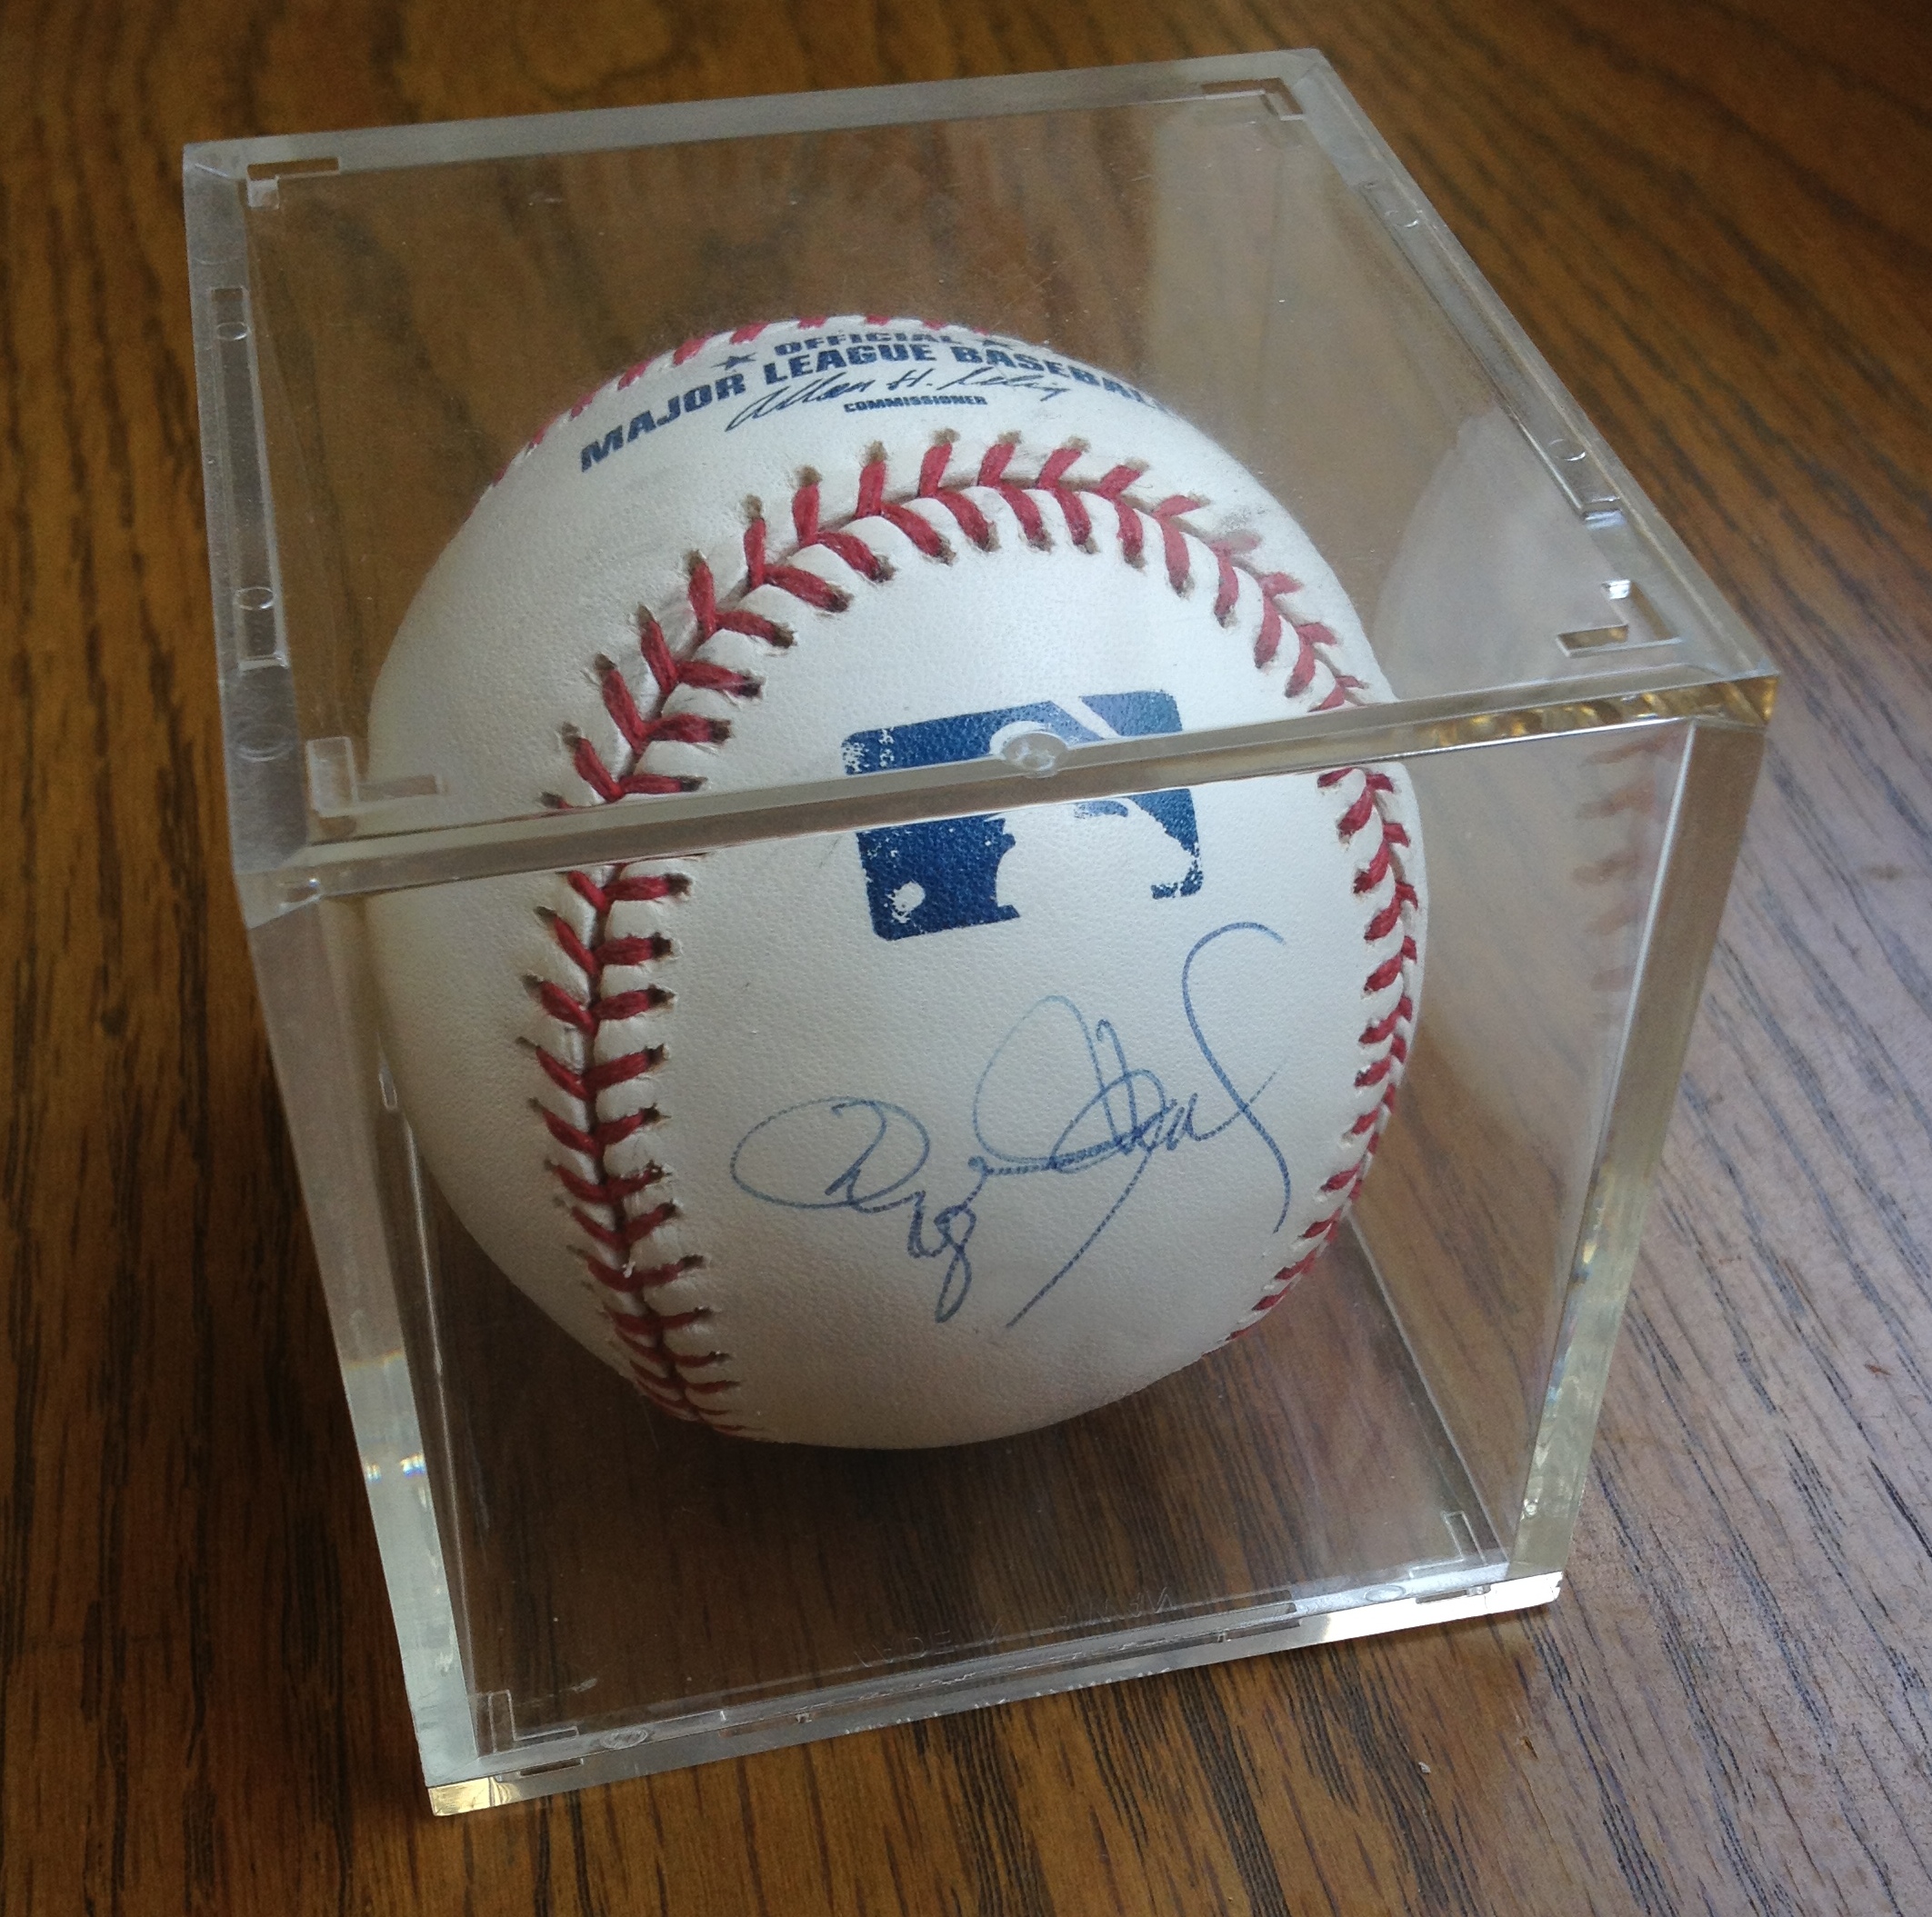 roger clemens autographed baseball